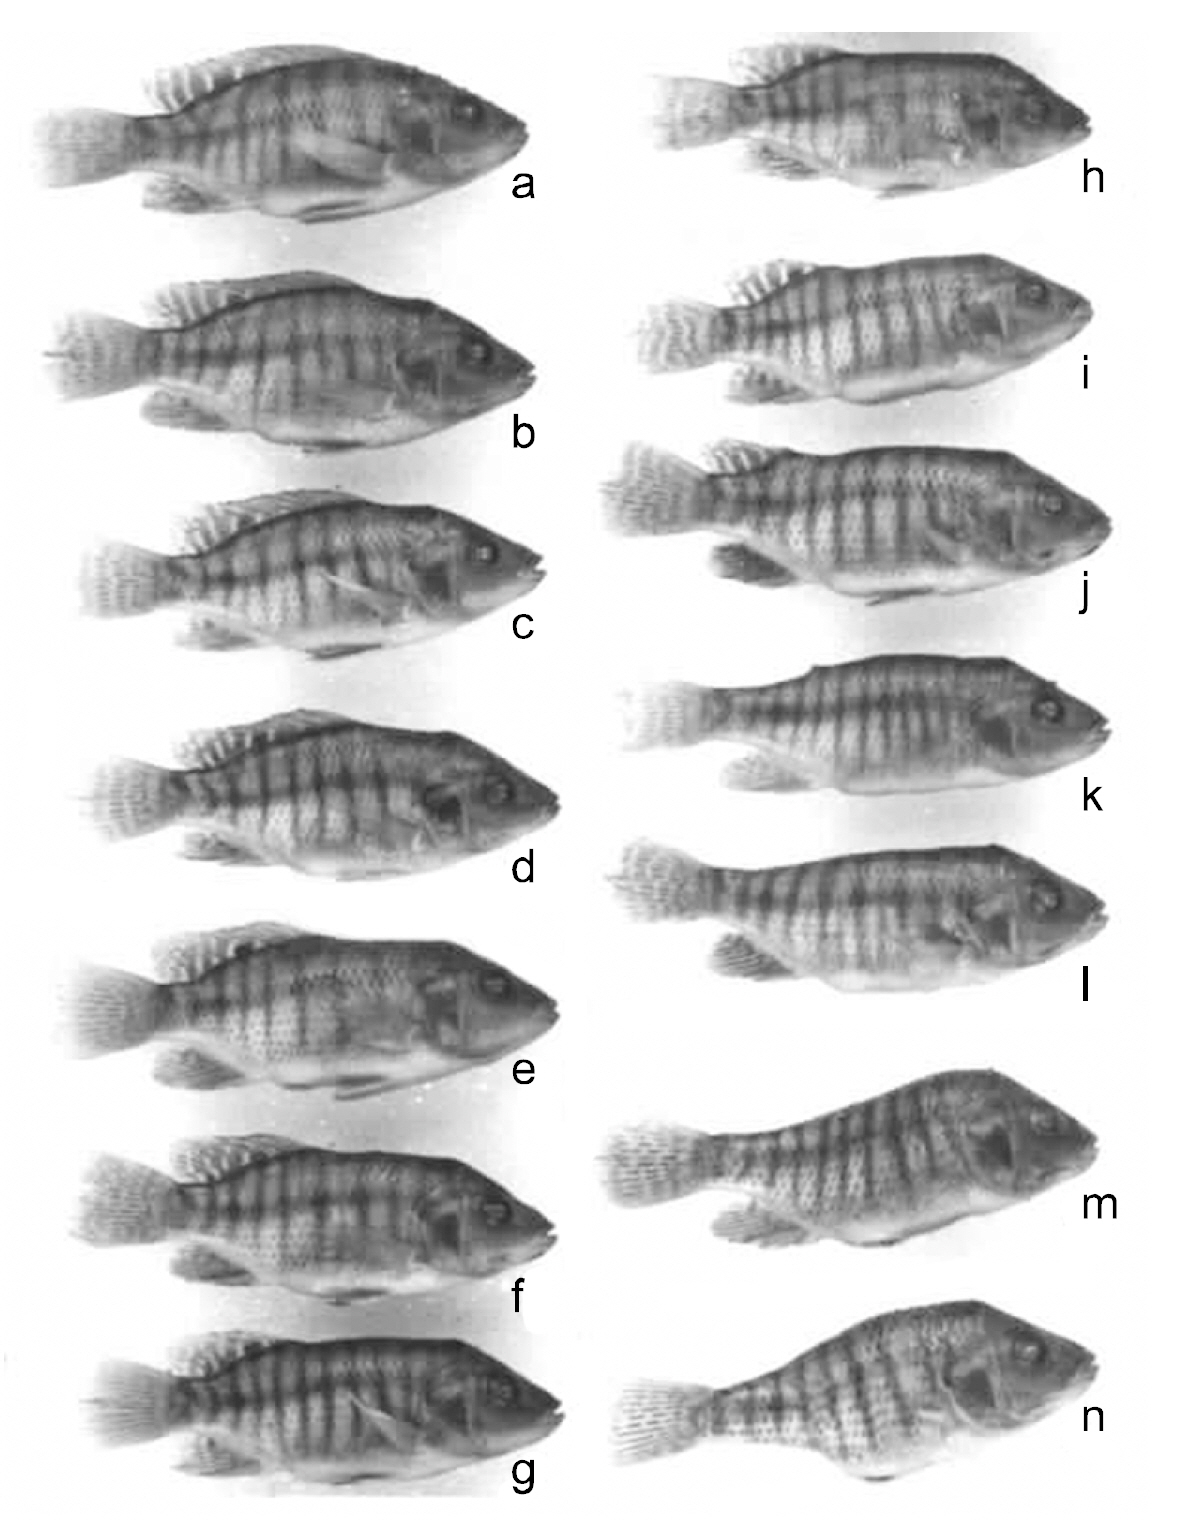 Saddleback in Oreochromis aureus (b-n) showing the variable expression of the phenotype; (a) is a normal individual. Source: Tave et al. (1983) J Fish Dis 6 59-73; with permission courtesy of Journal of Fish Diseases.